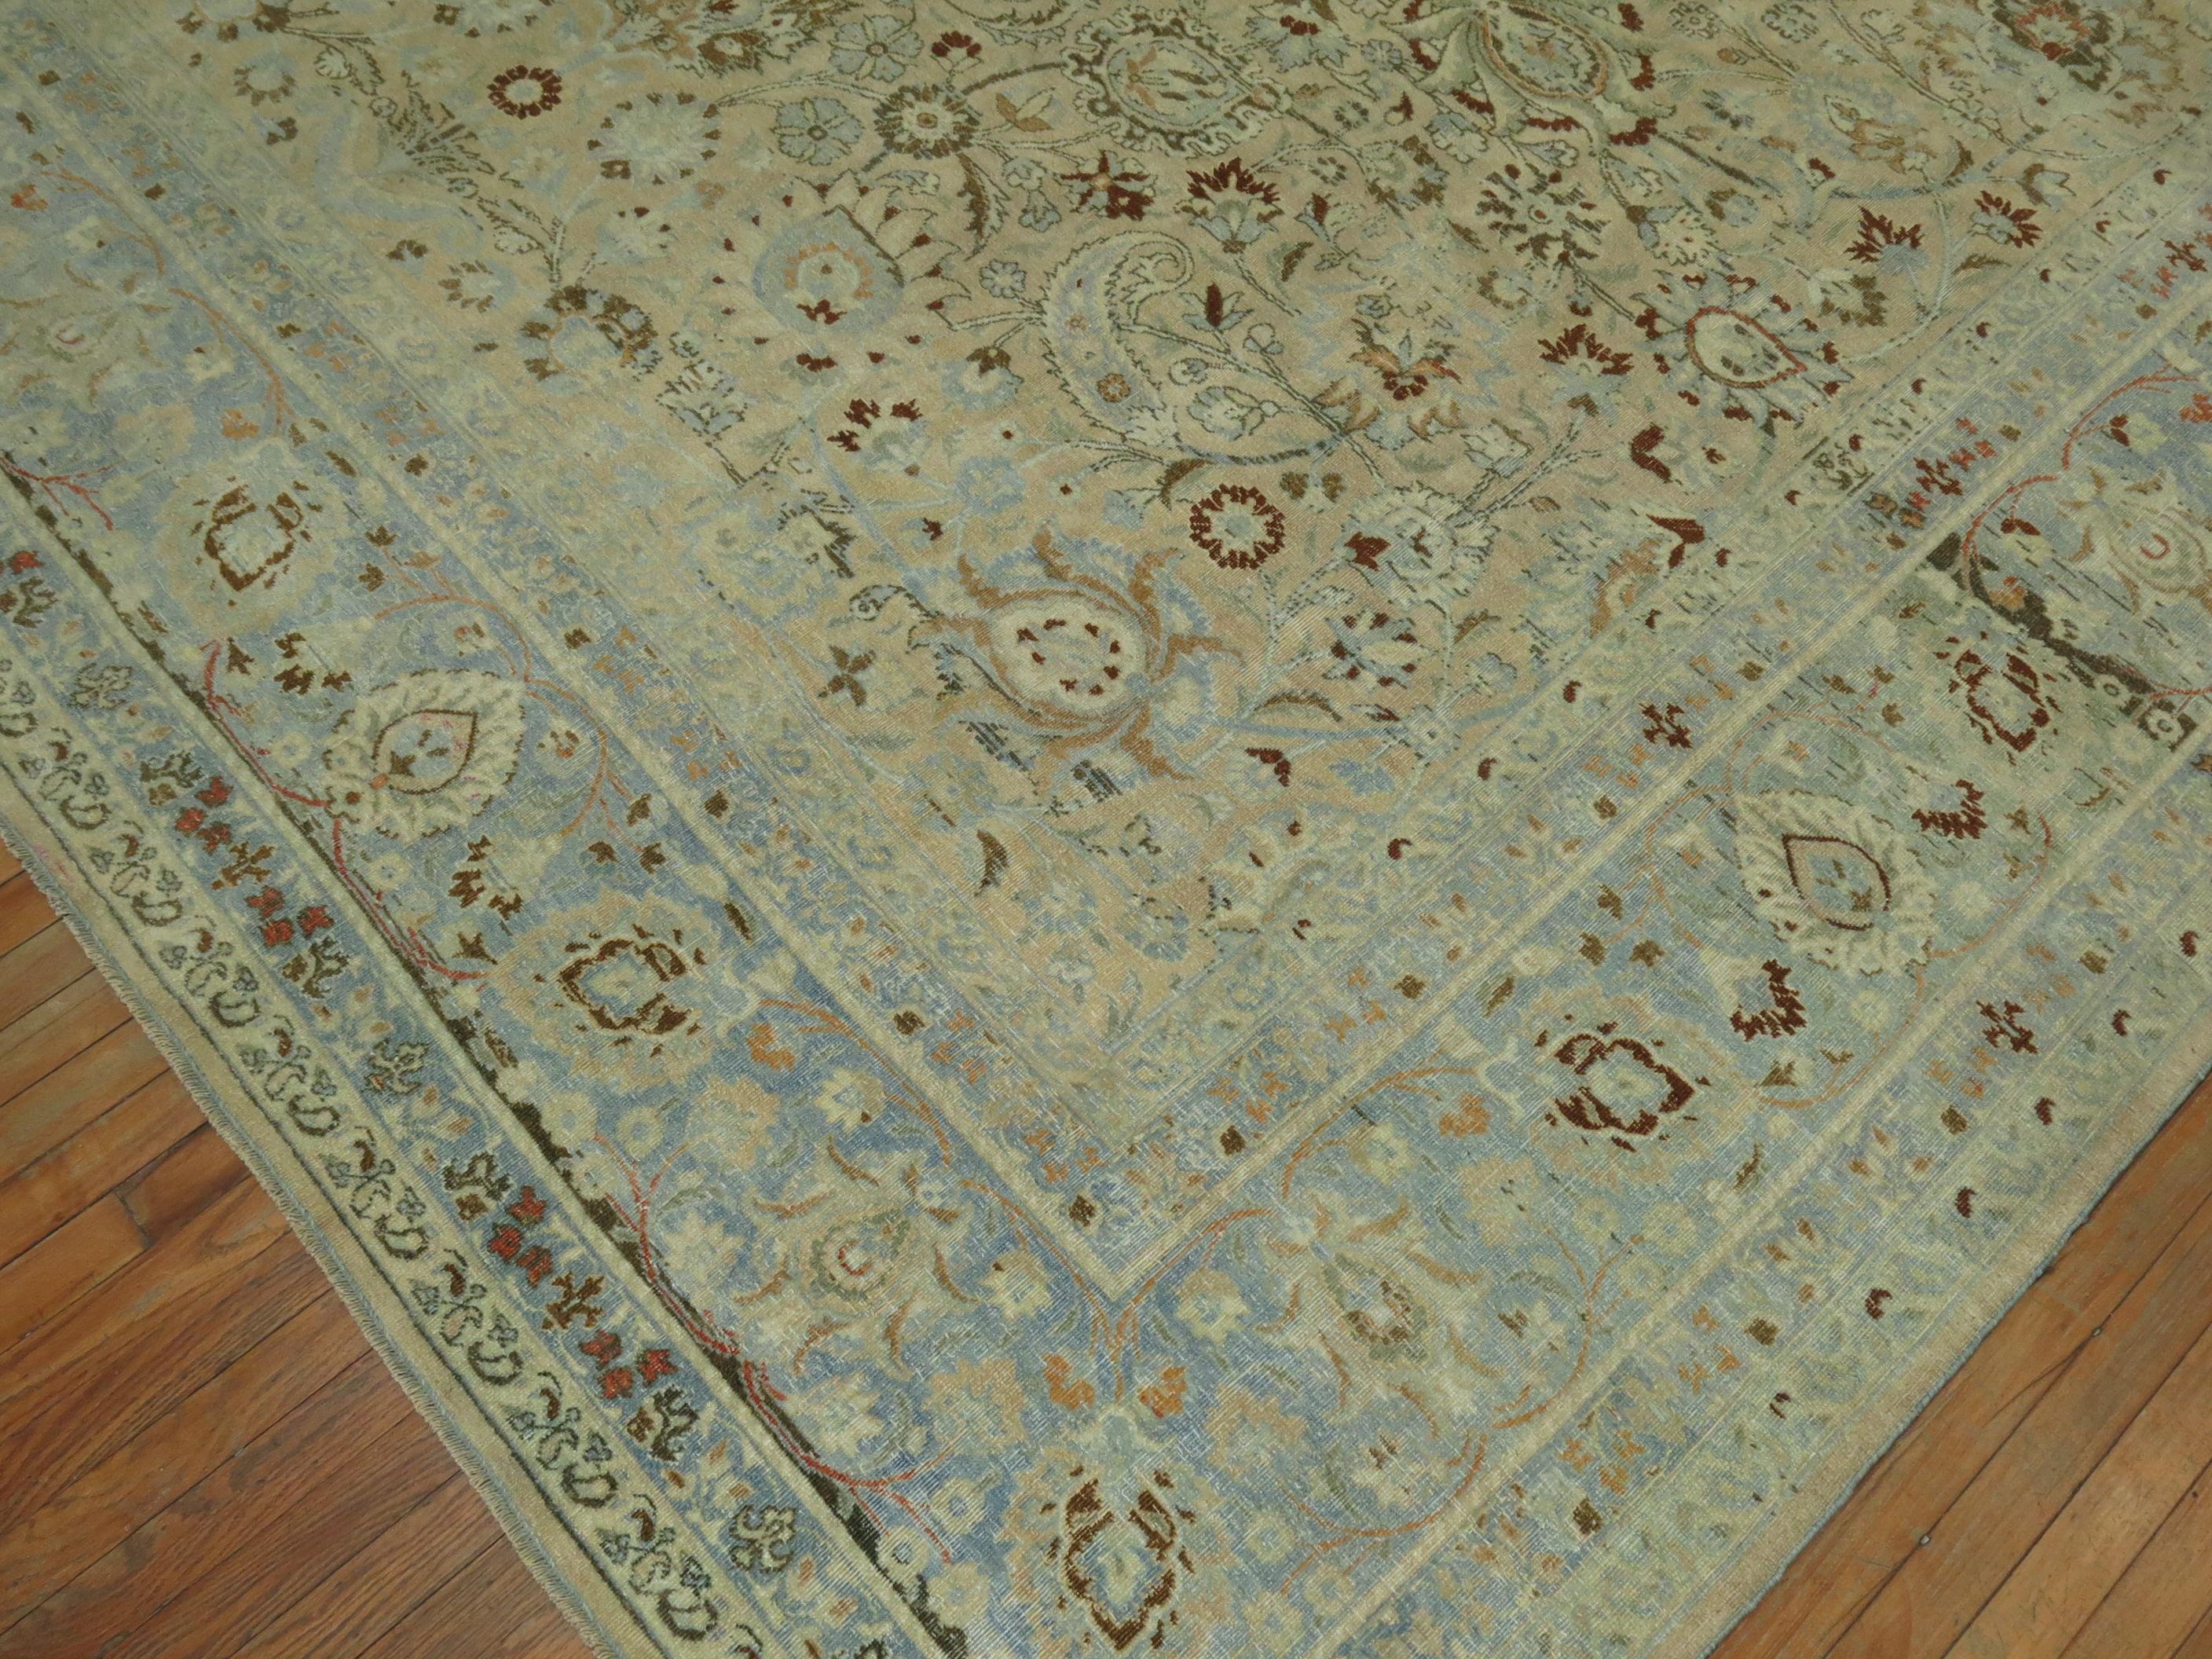 Stunning Tan Icy Blue Antique Persian Formal Meshed Rug, 20th Century For Sale 6